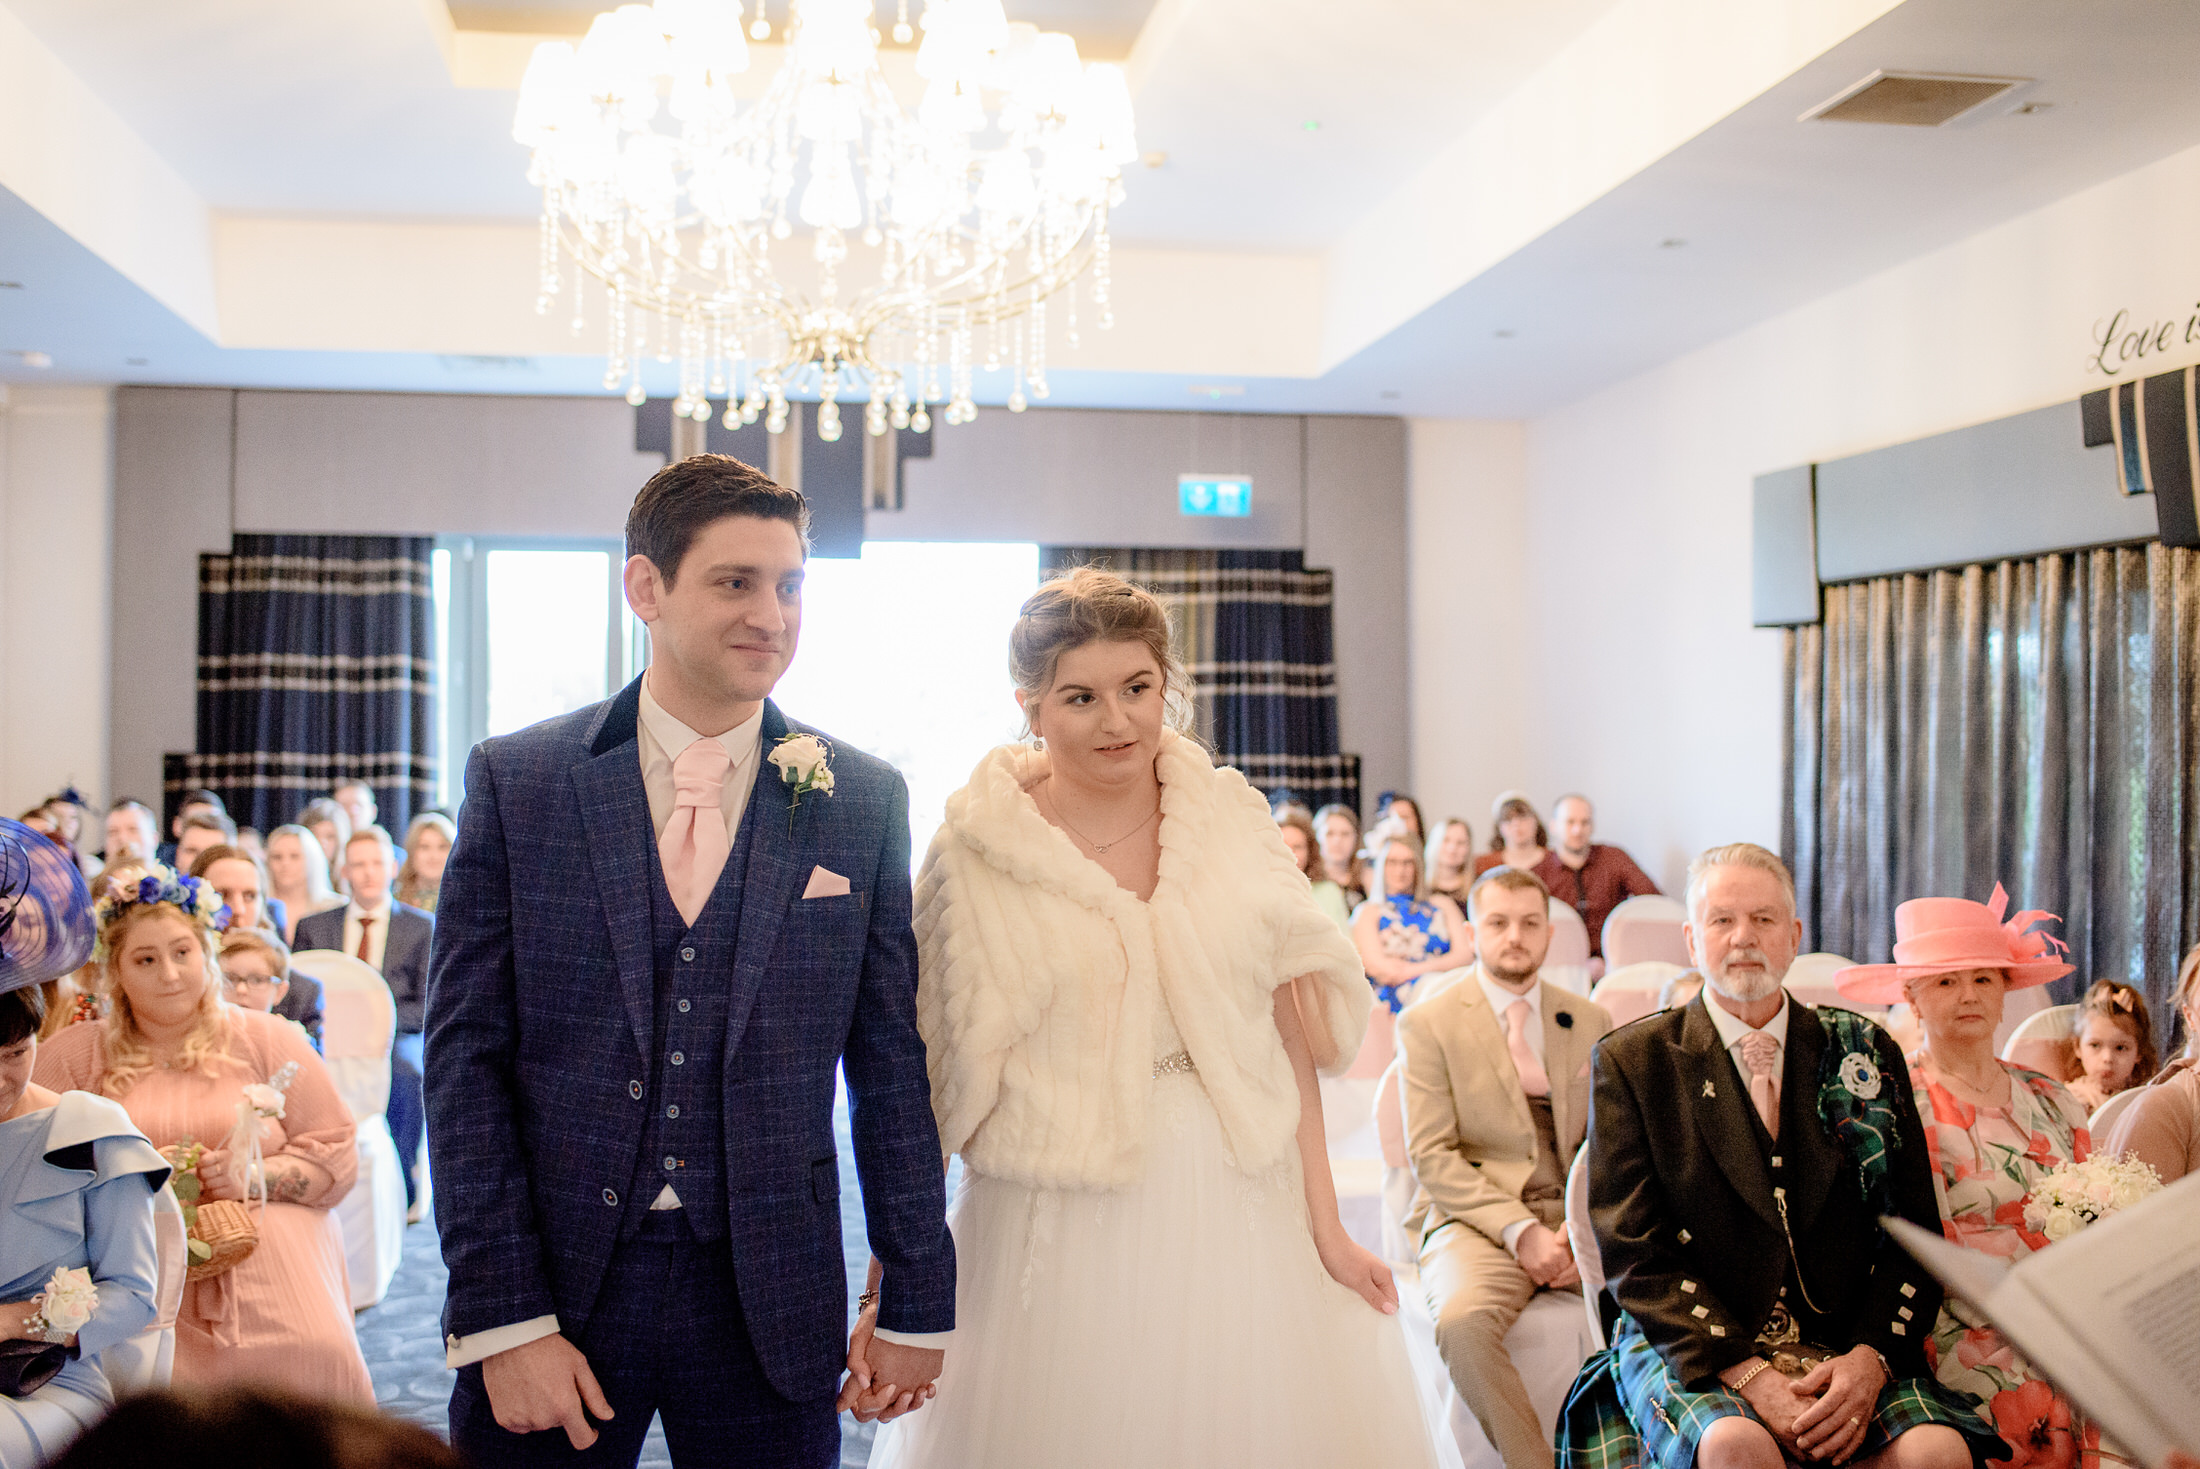 A bride and groom walking down the aisle at a Brackenborough Hotel wedding ceremony.